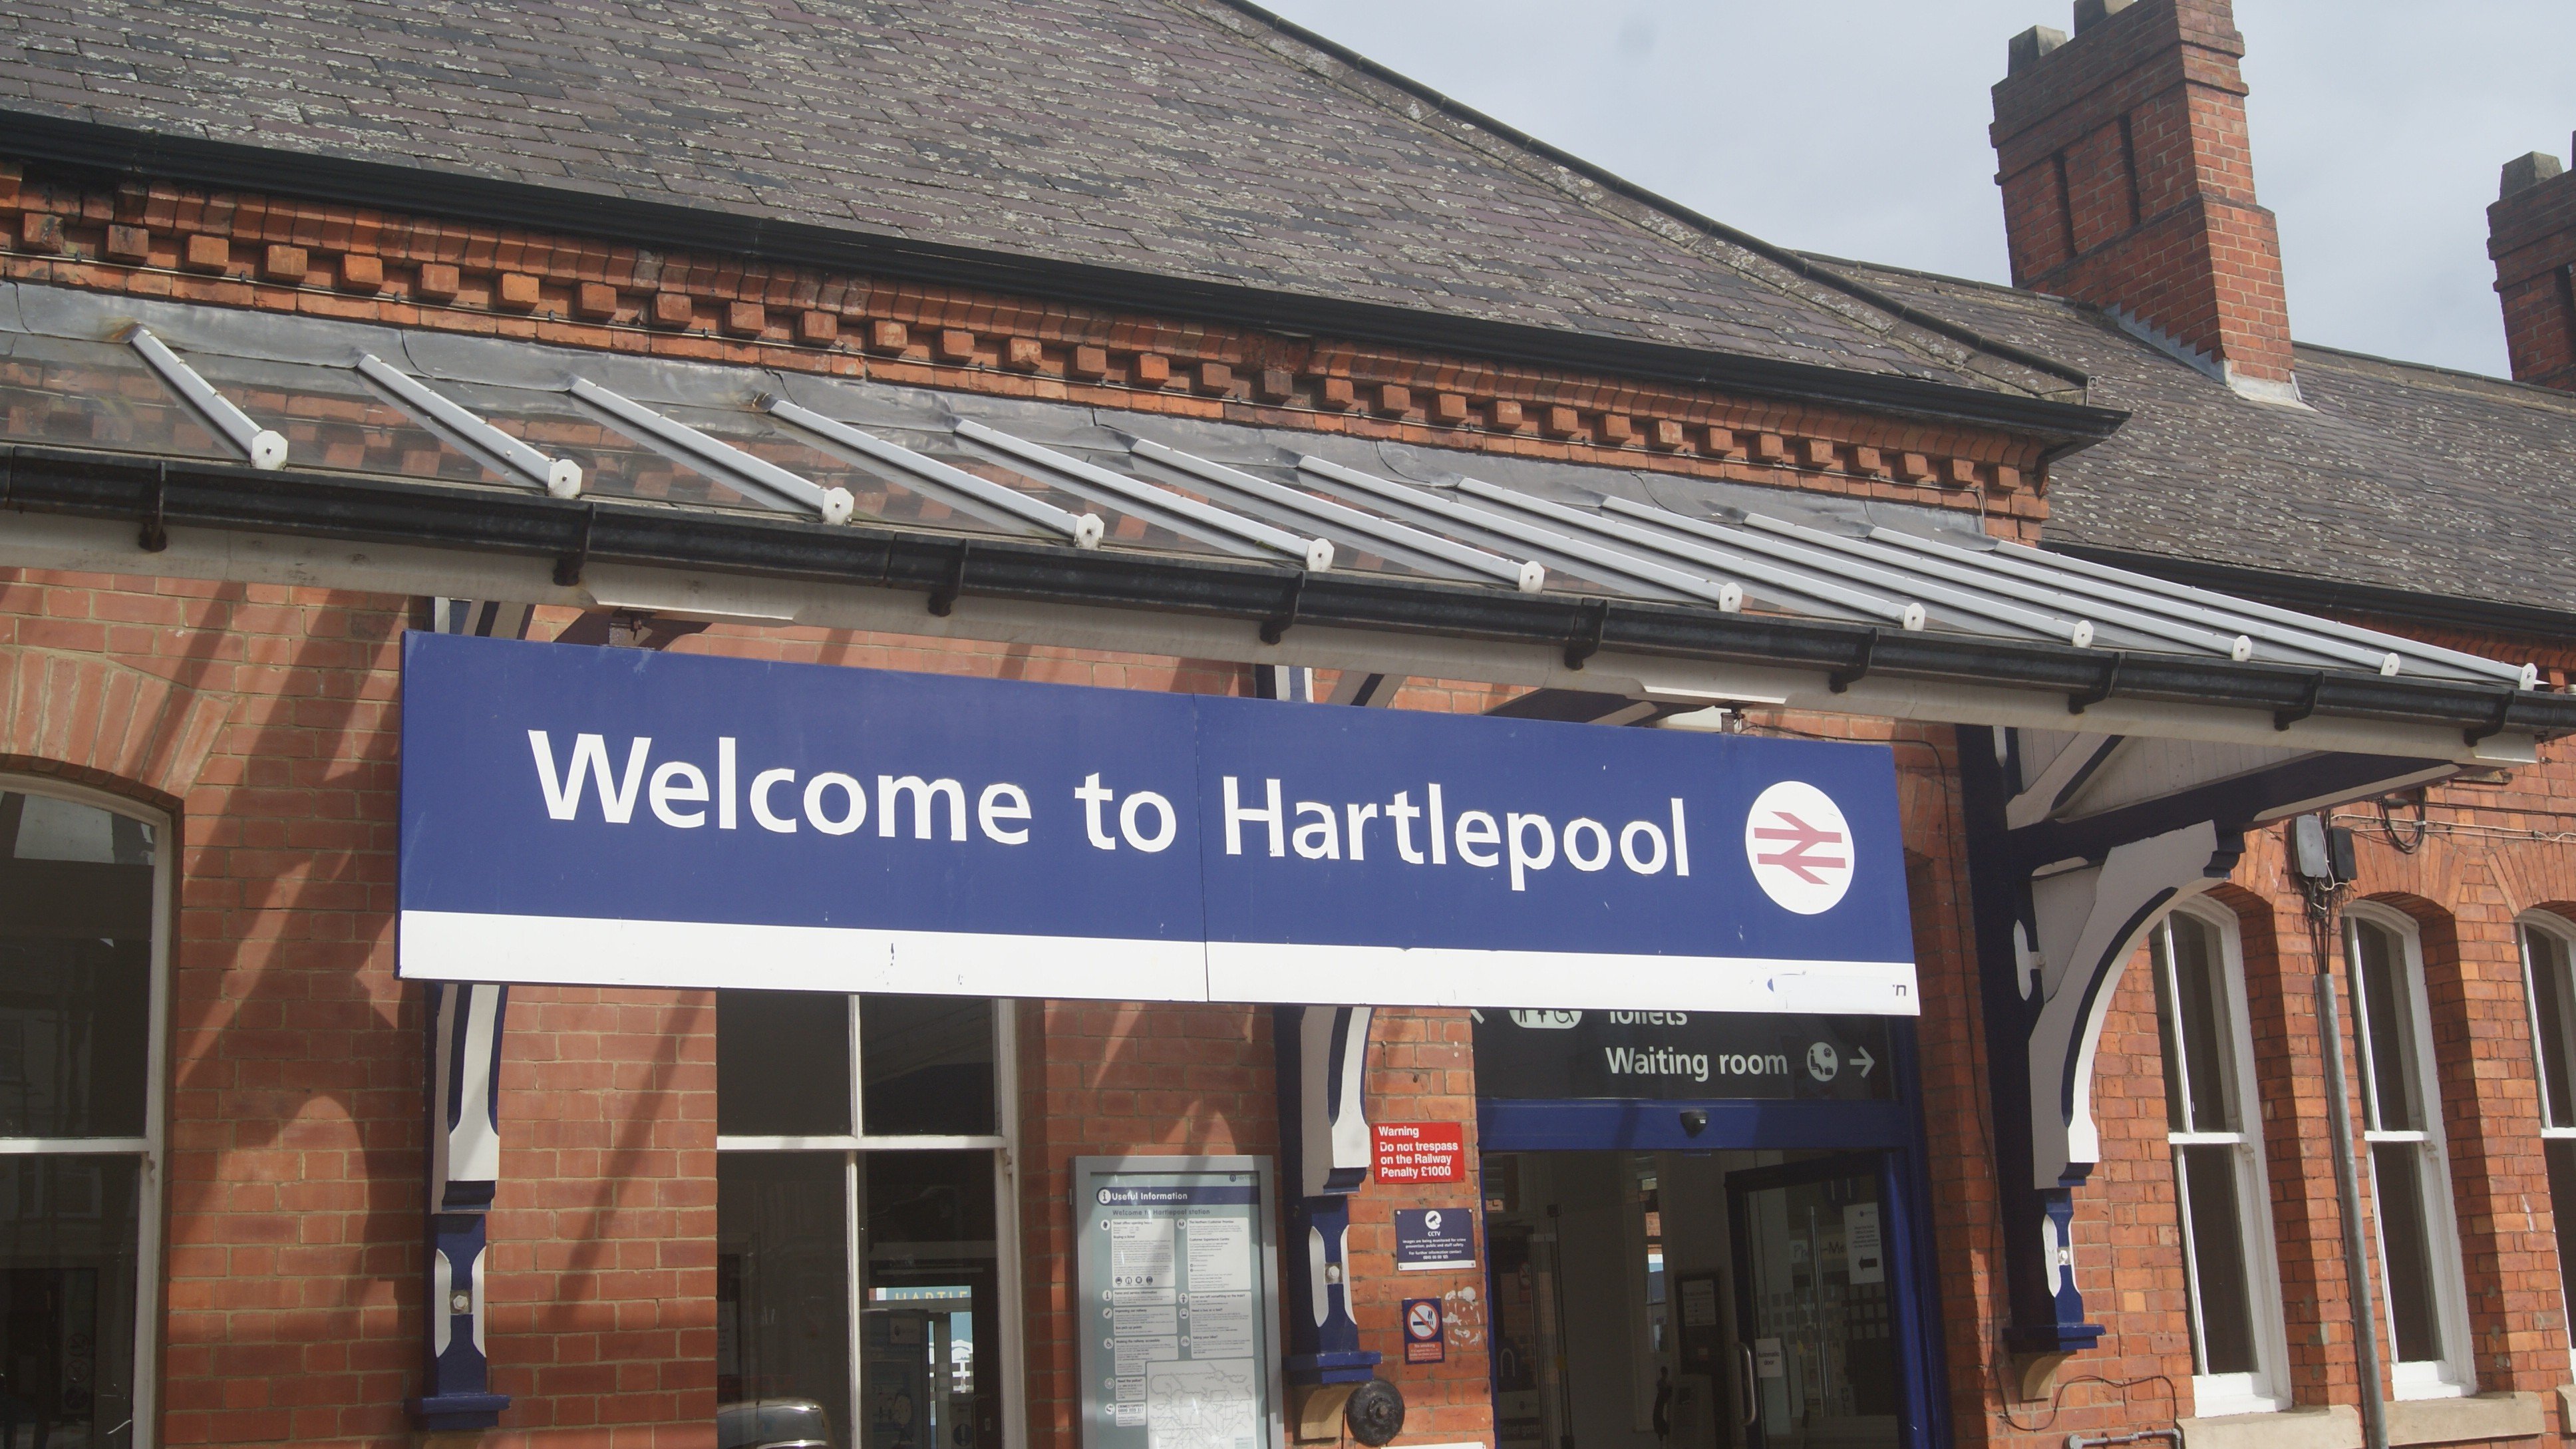 This image shows Hartlepool station